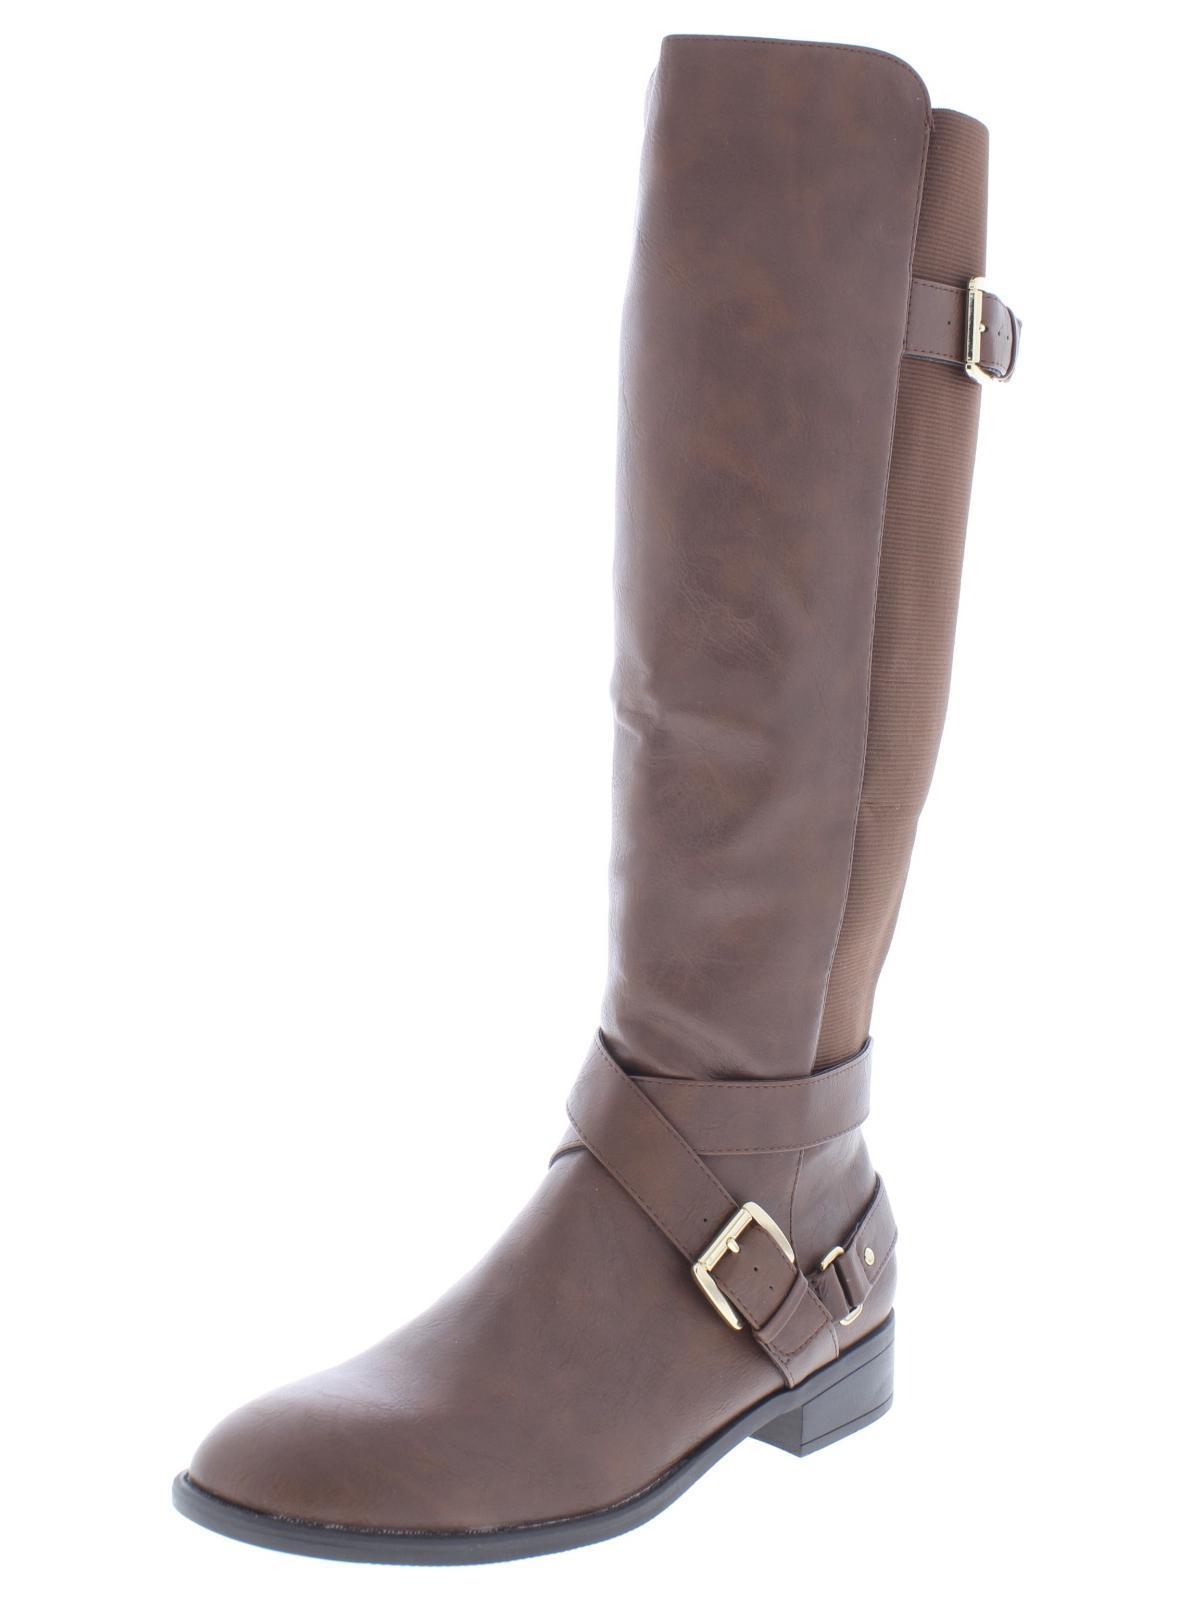 Thalia Sodi Vada Faux Leather Over-the-knee Riding Boots in Brown | Lyst